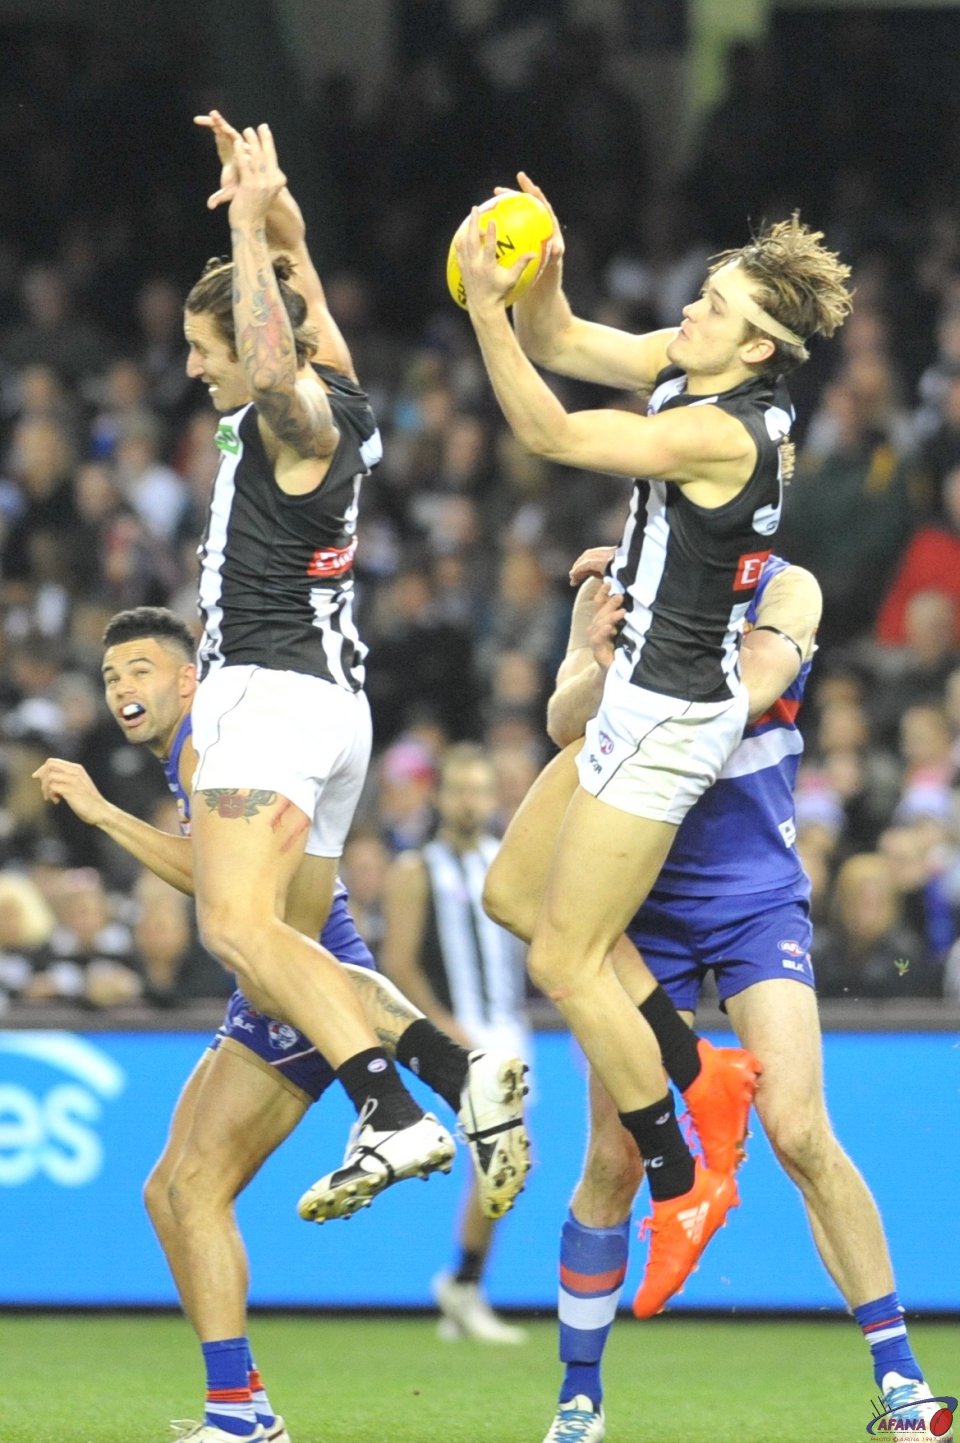 Jesse White misses , Darcy Moore Hold the mark